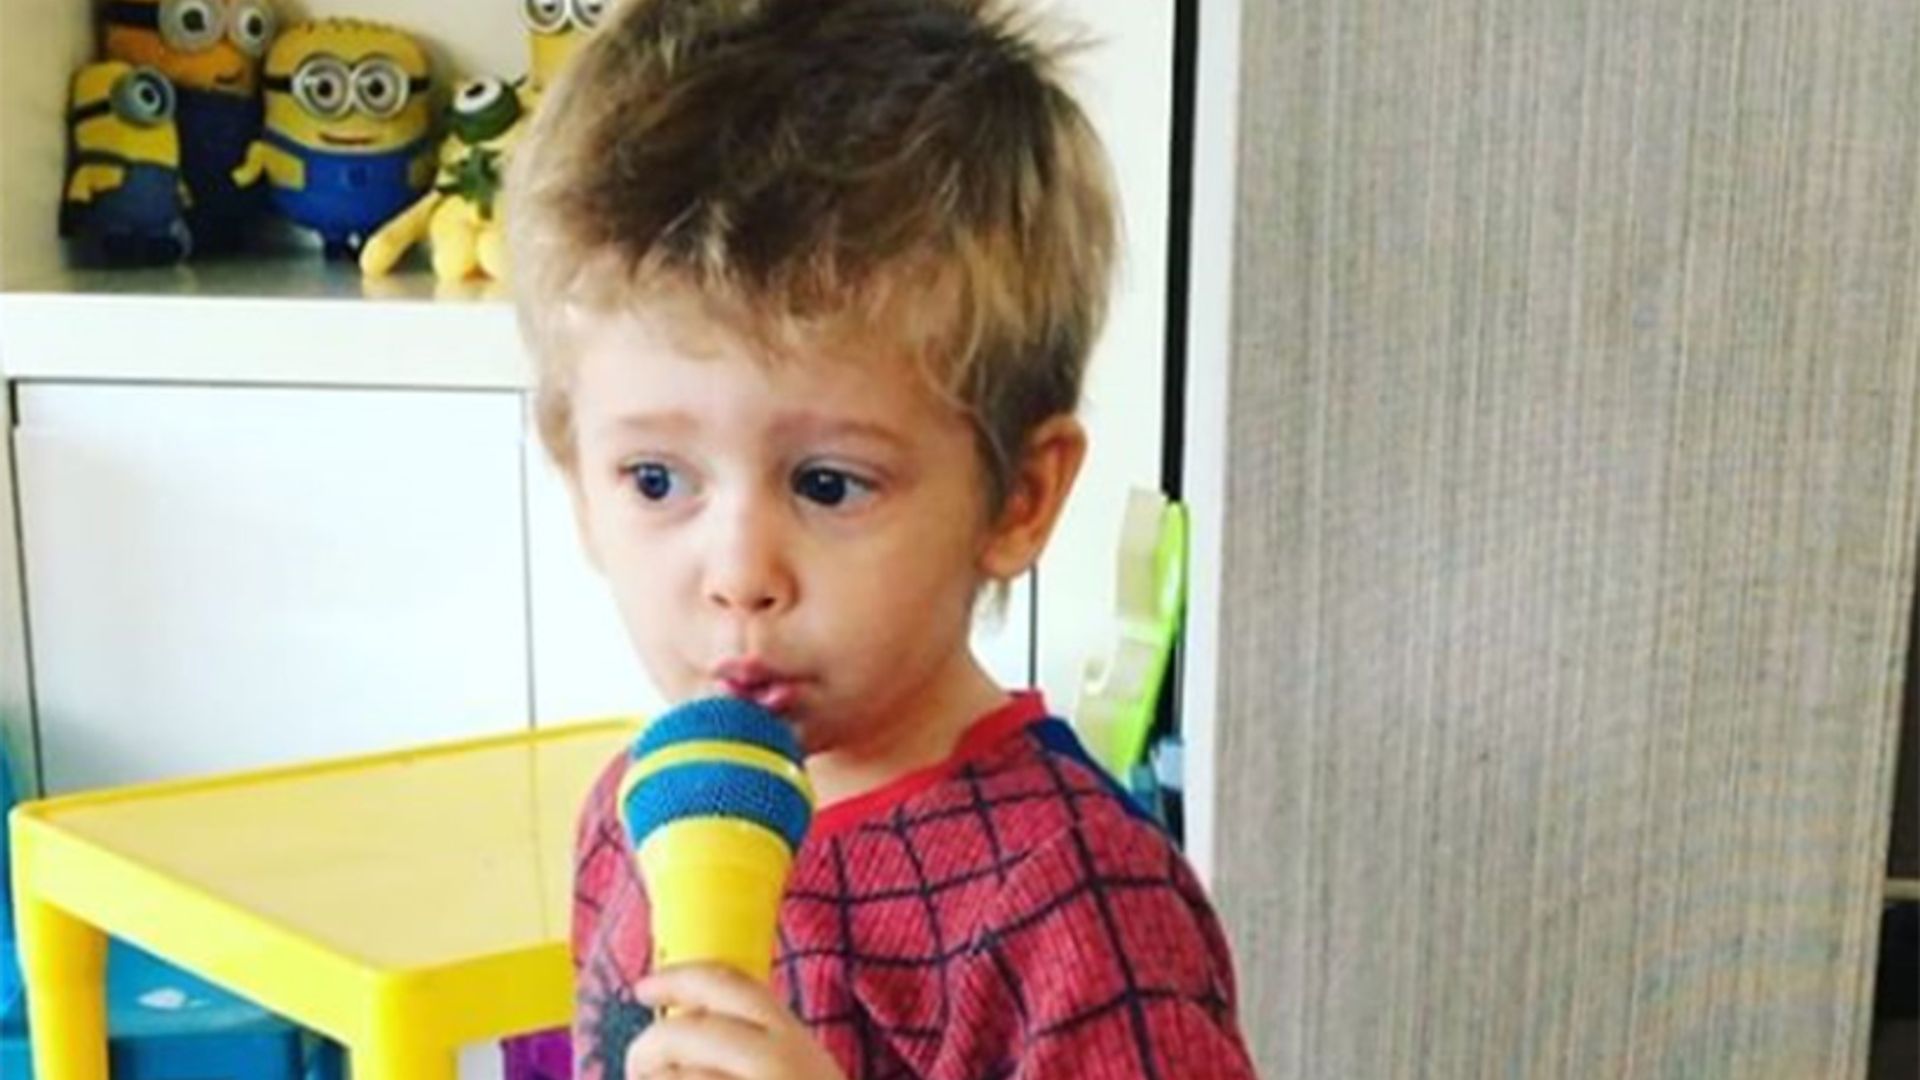 Michael Bublé's son 'diagnosed with liver cancer and has started chemotherapy'